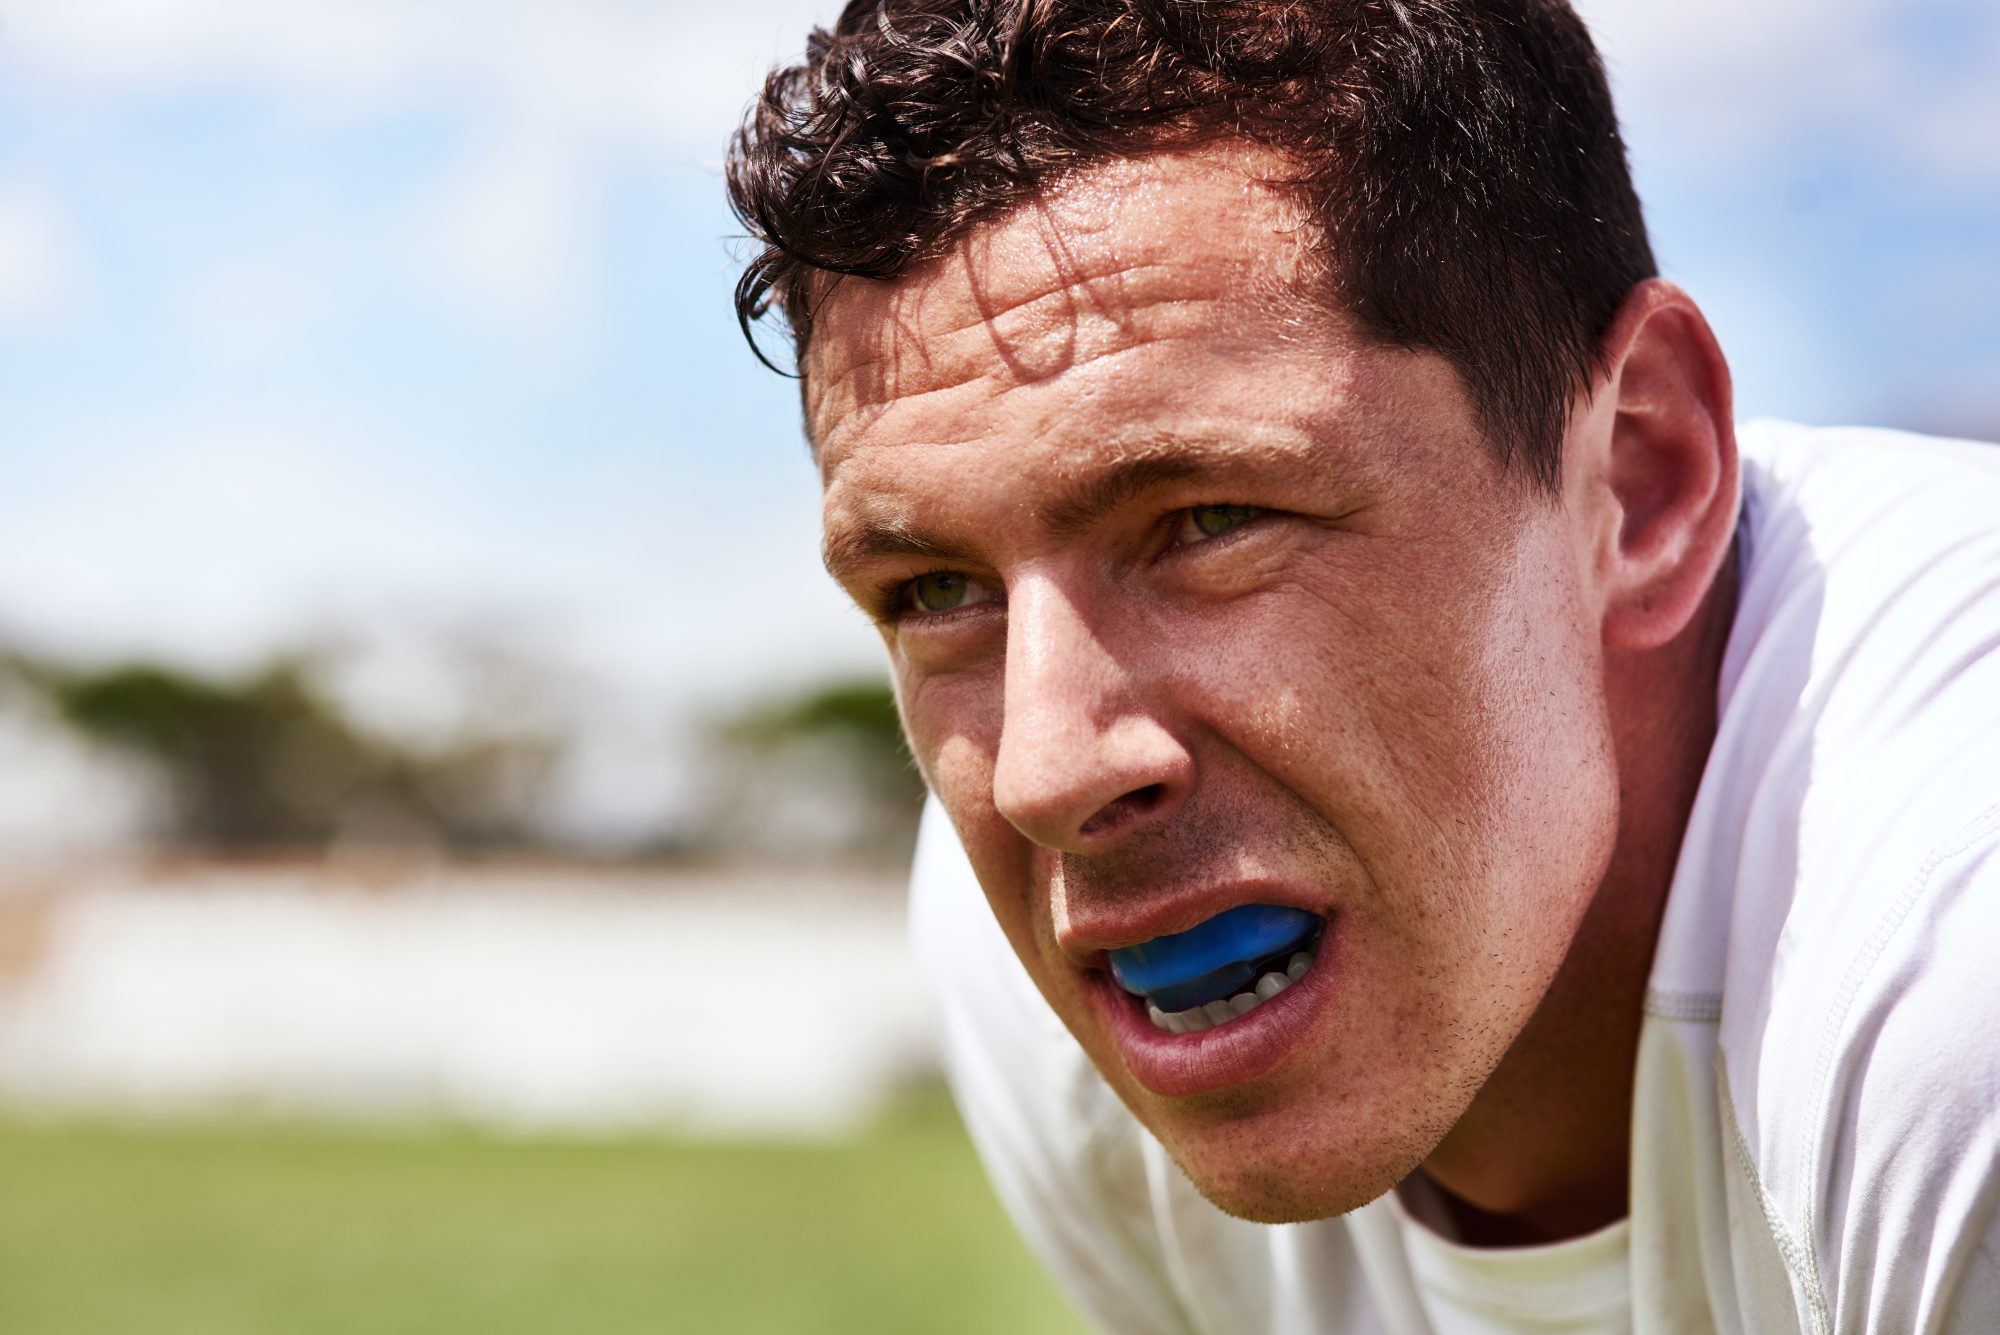 Athletic Mouthguards: The Essential Protective Gear